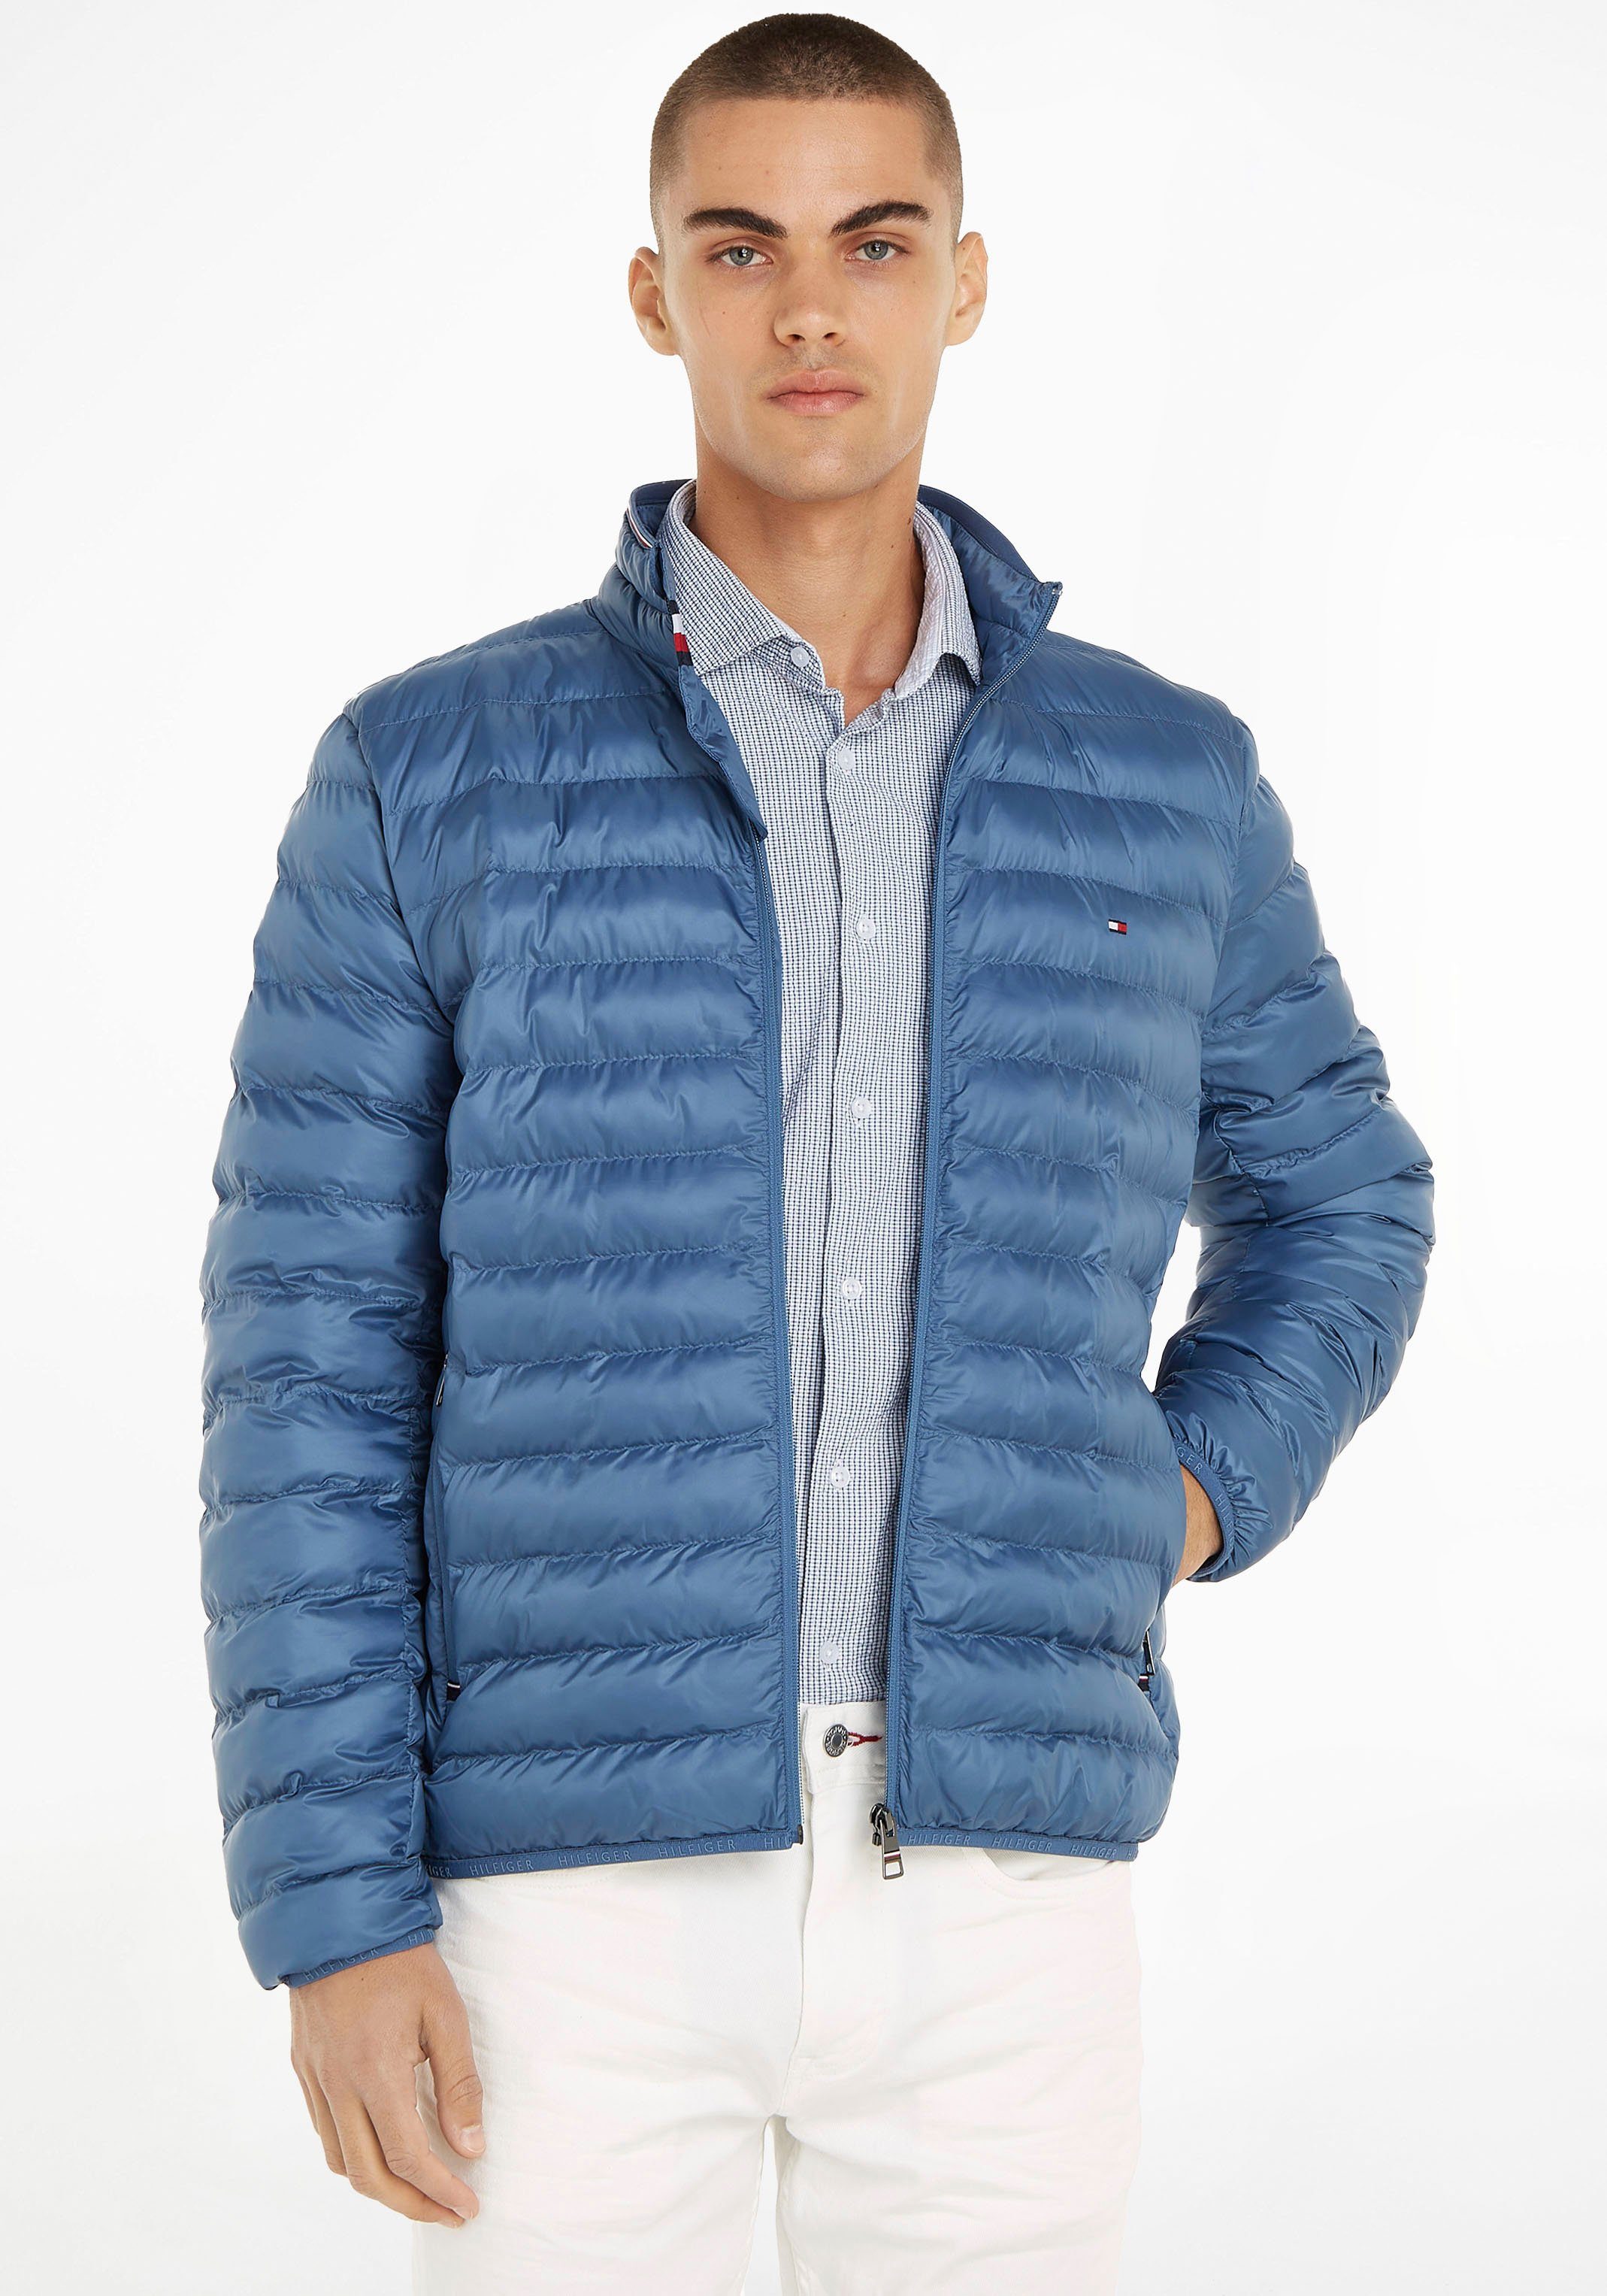 Blue Hilfiger Coast mit RECYCLED Tommy Tommy PACKABLE Logostickerei Hilfiger Steppjacke JACKET